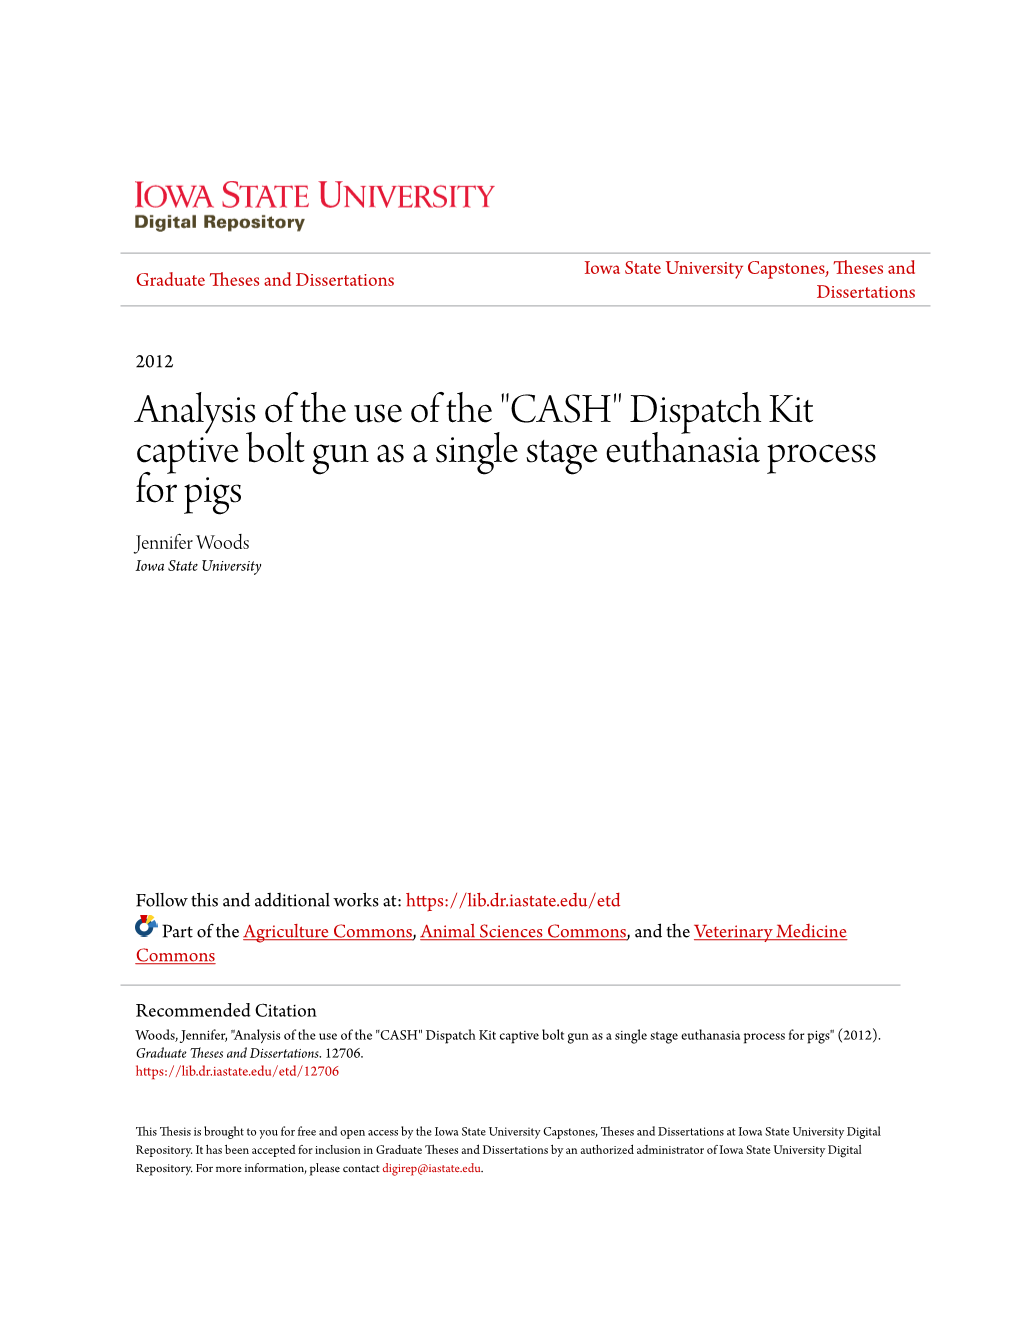 Analysis of the Use of the "CASH" Dispatch Kit Captive Bolt Gun As a Single Stage Euthanasia Process for Pigs Jennifer Woods Iowa State University